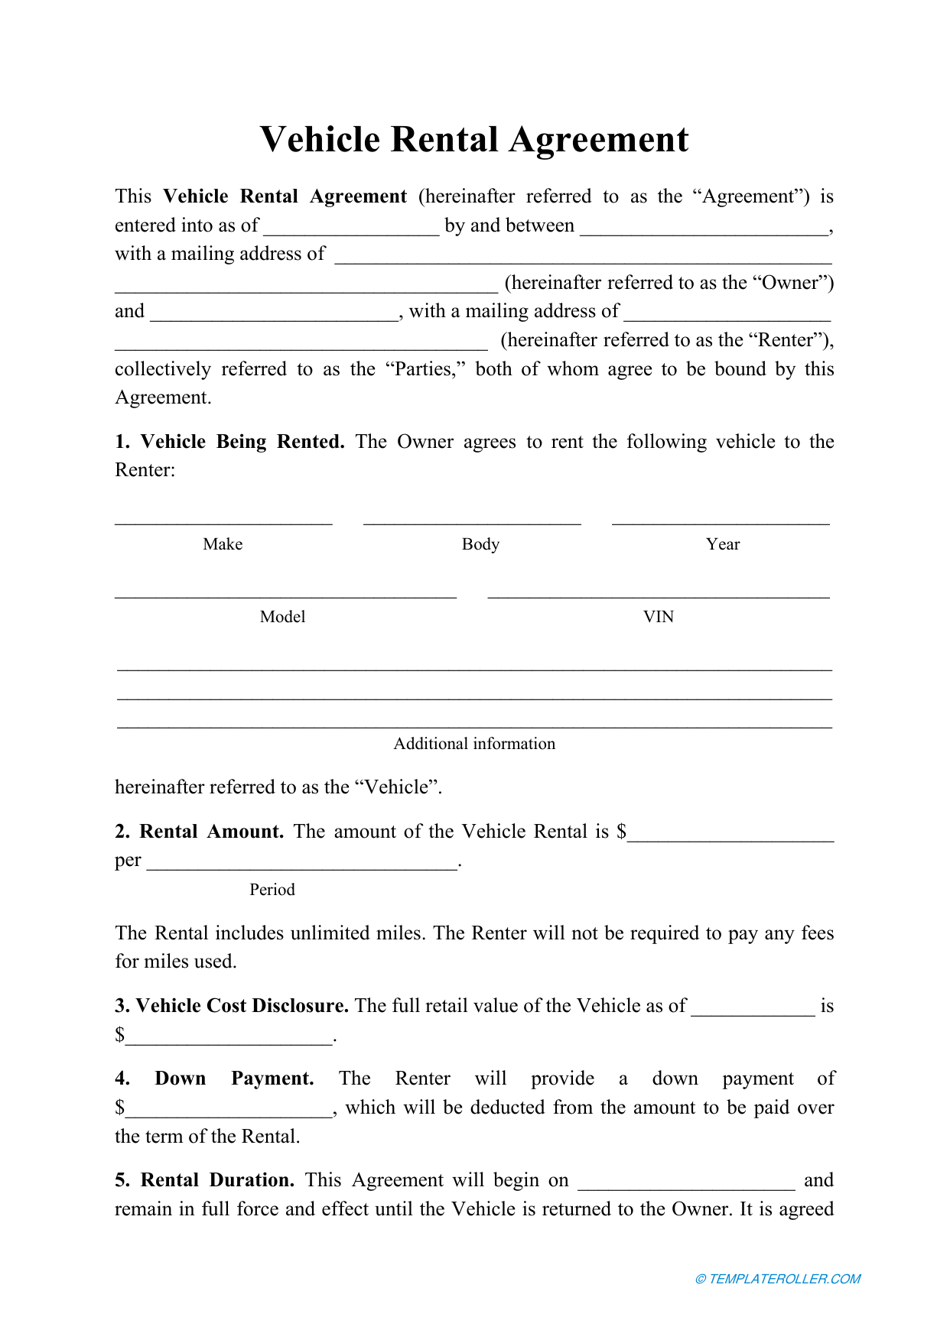 Vehicle Rental Agreement Template Download Printable PDF Inside car warranty agreement template